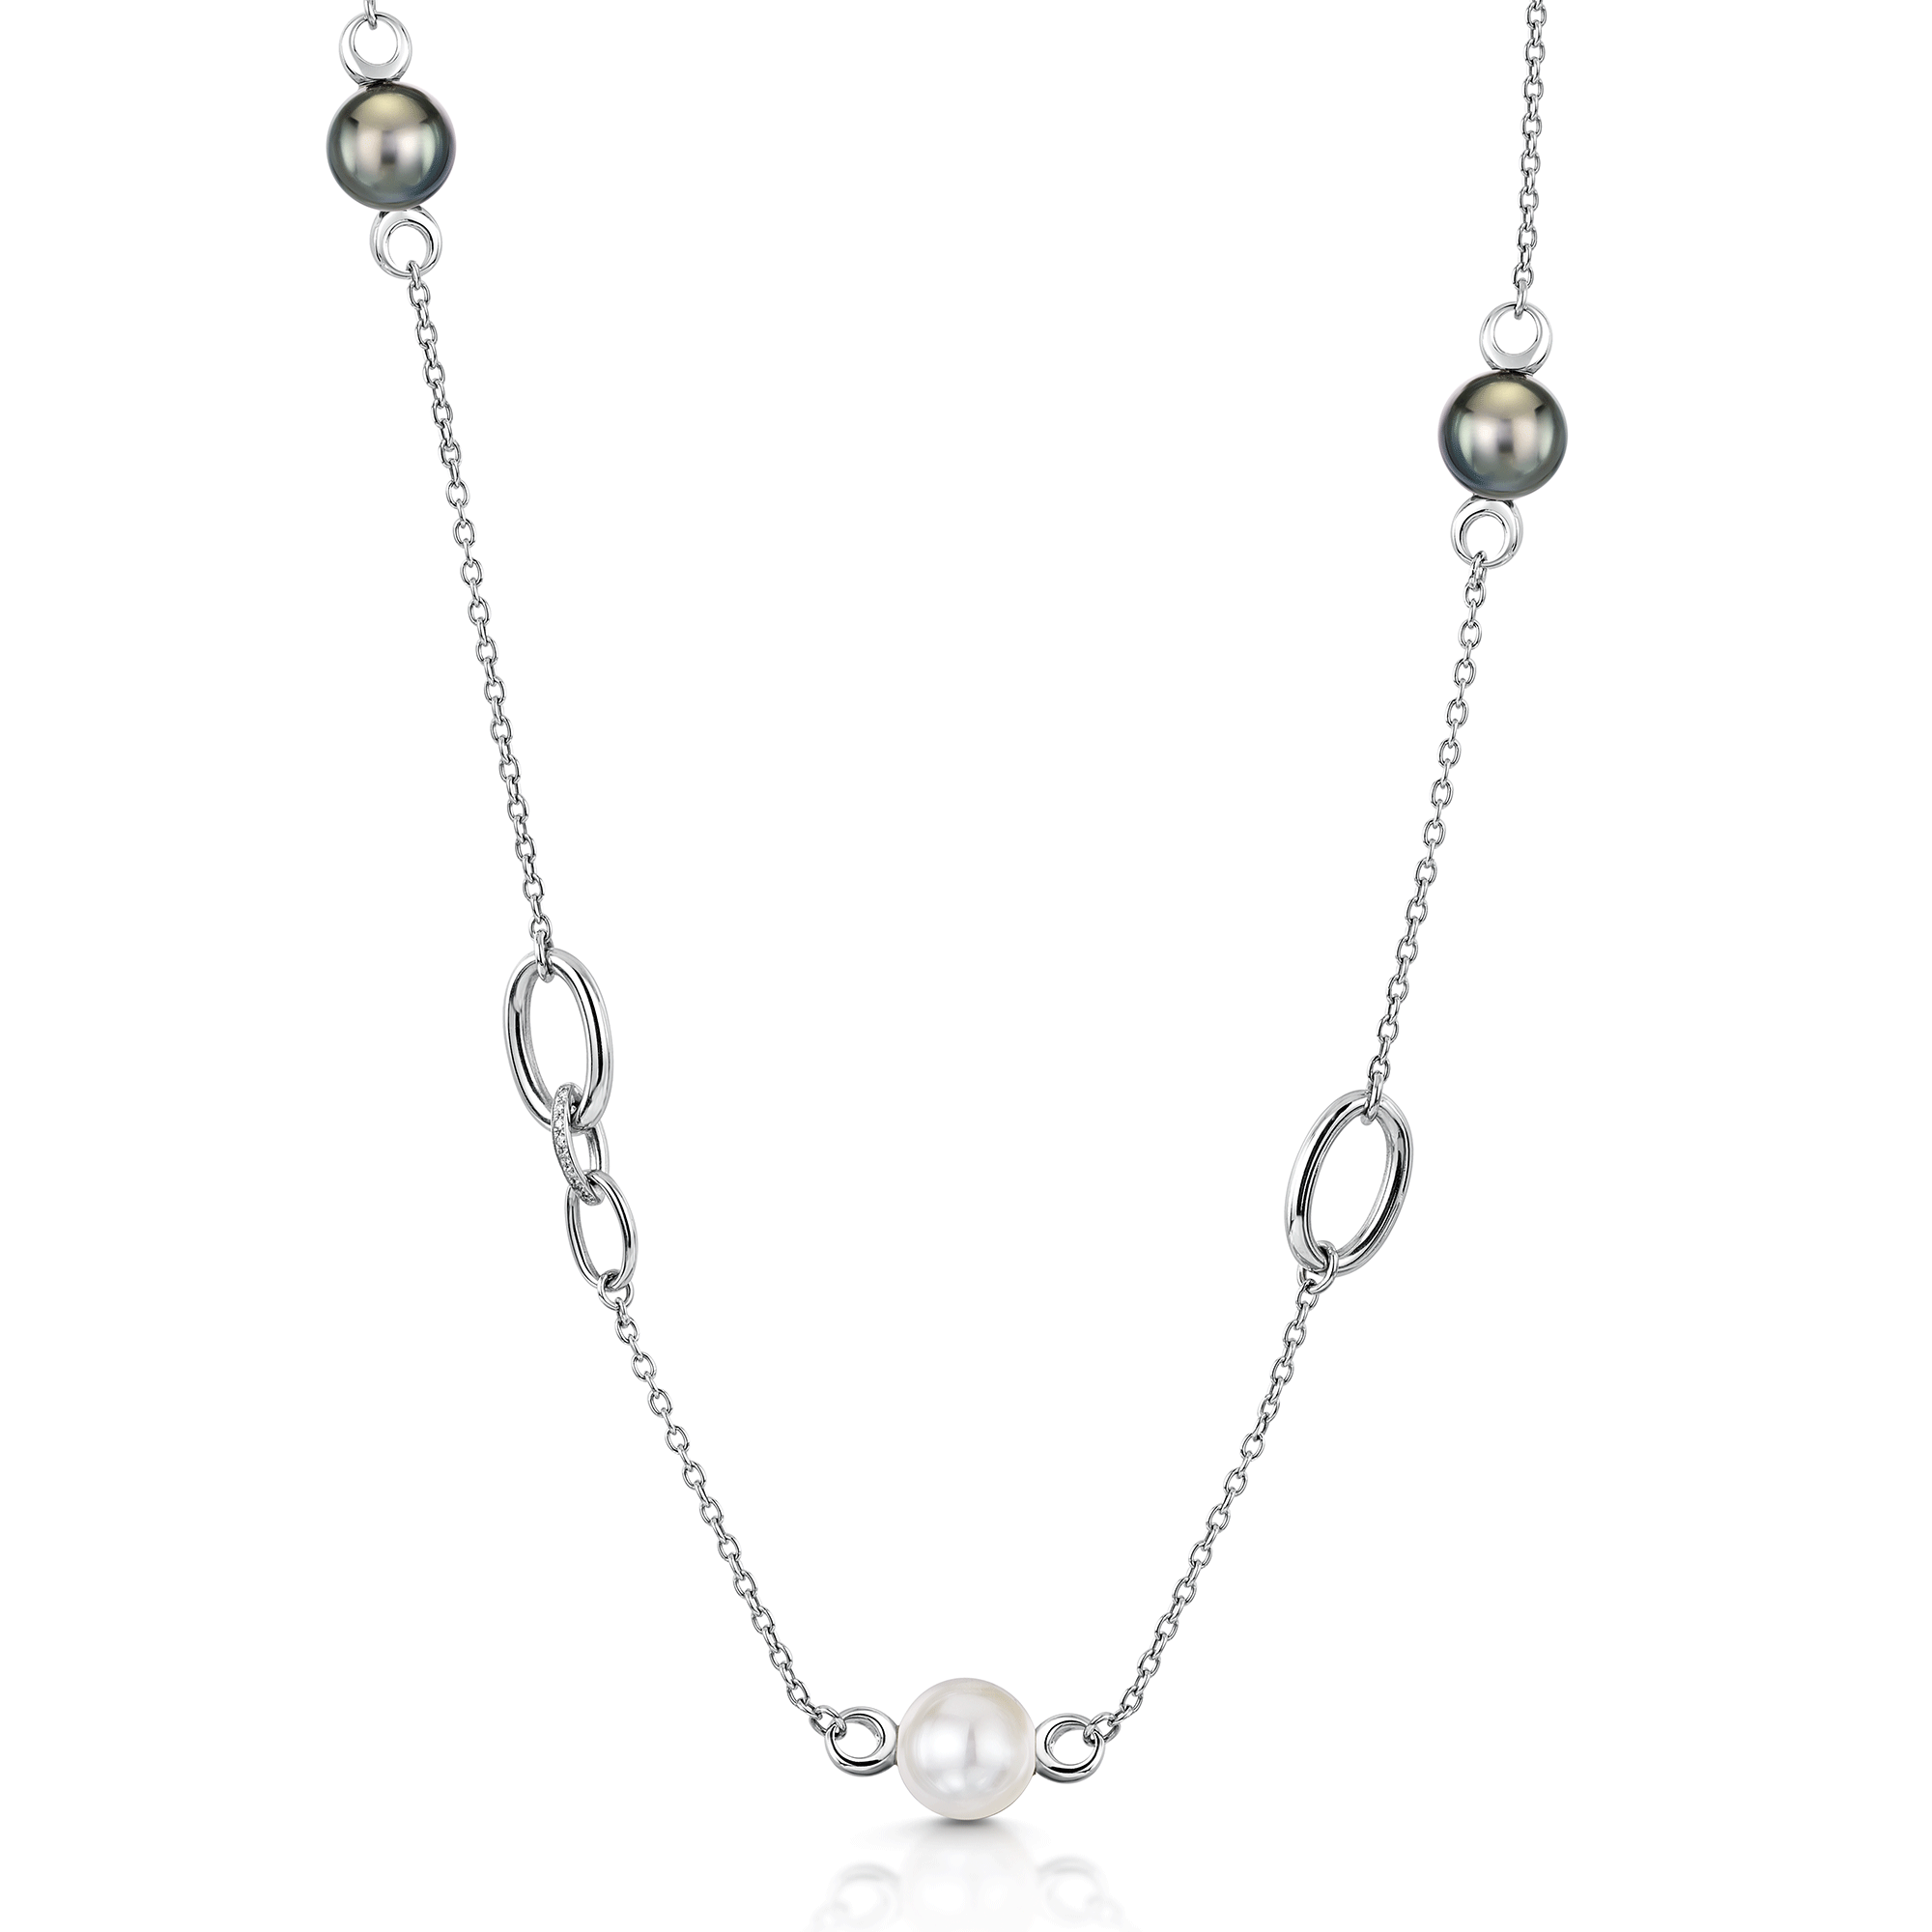 18ct White Gold Southsea and Tahitian Cultured Pearl Necklace with Two Pave Set Links